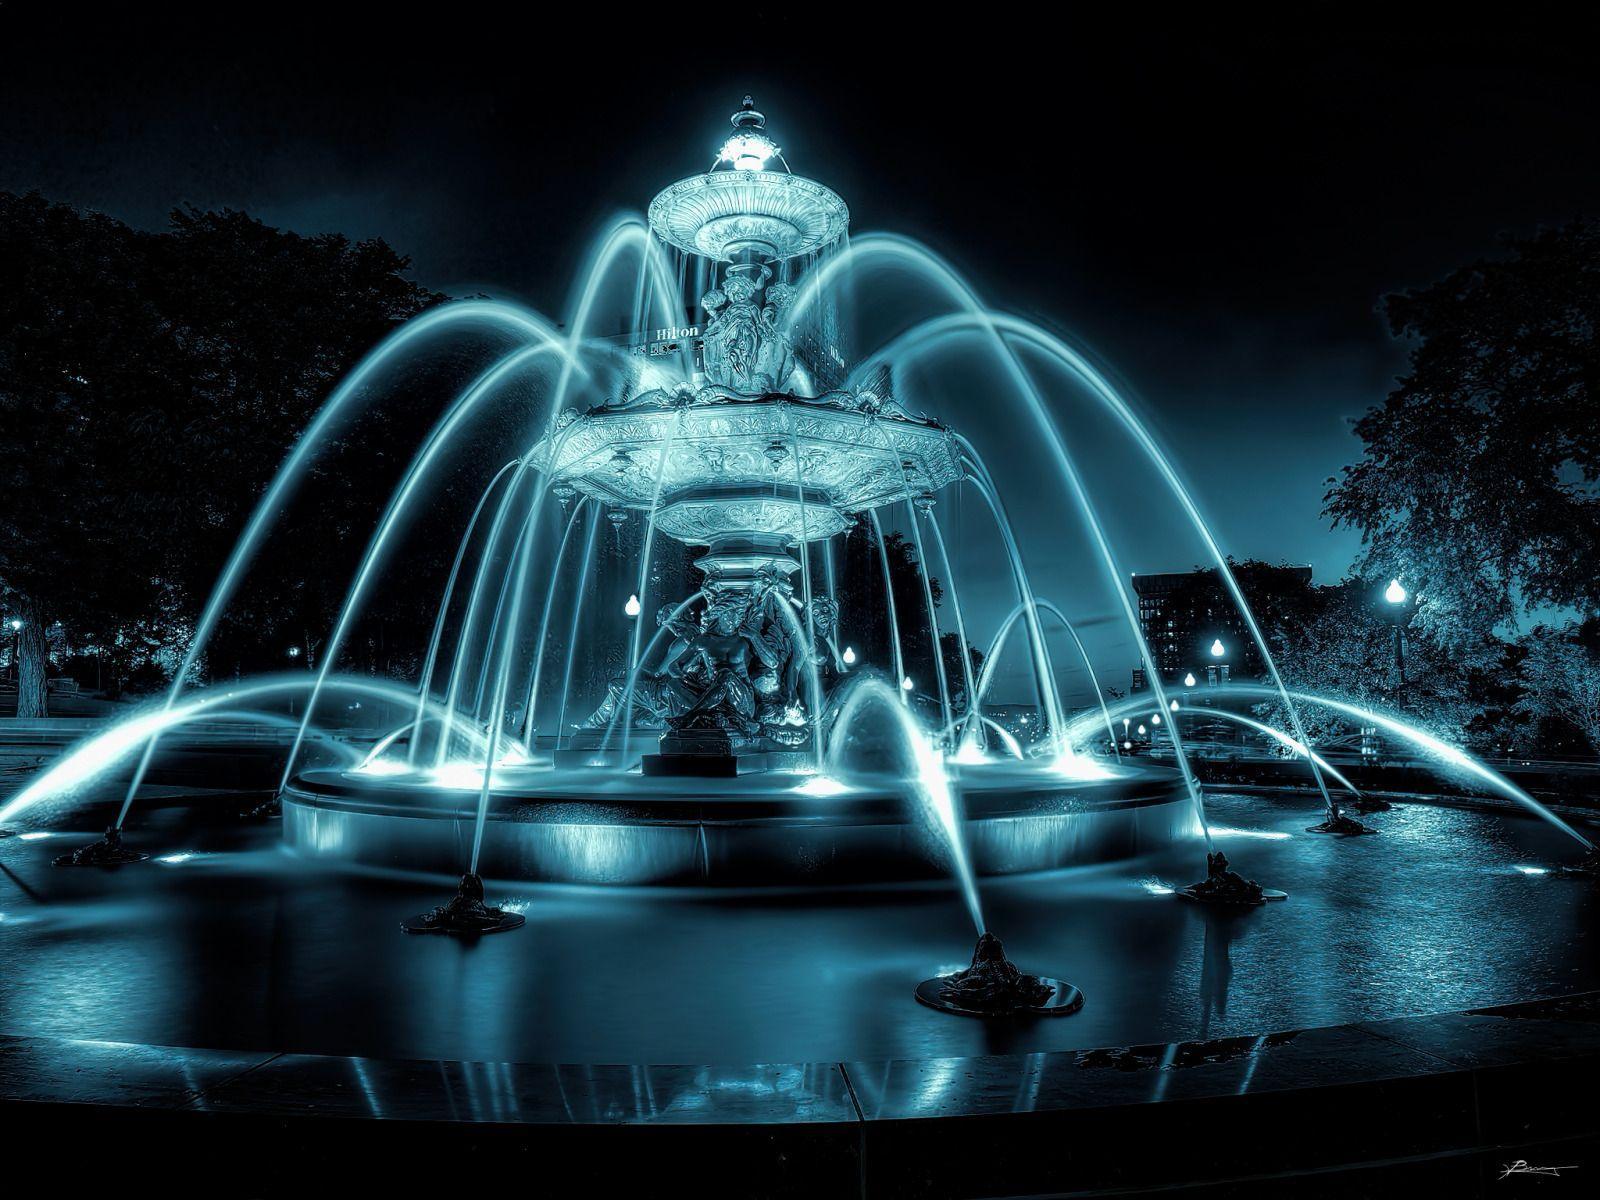 Beautiful Fountain Shining at Night Time, Quebec, Canada